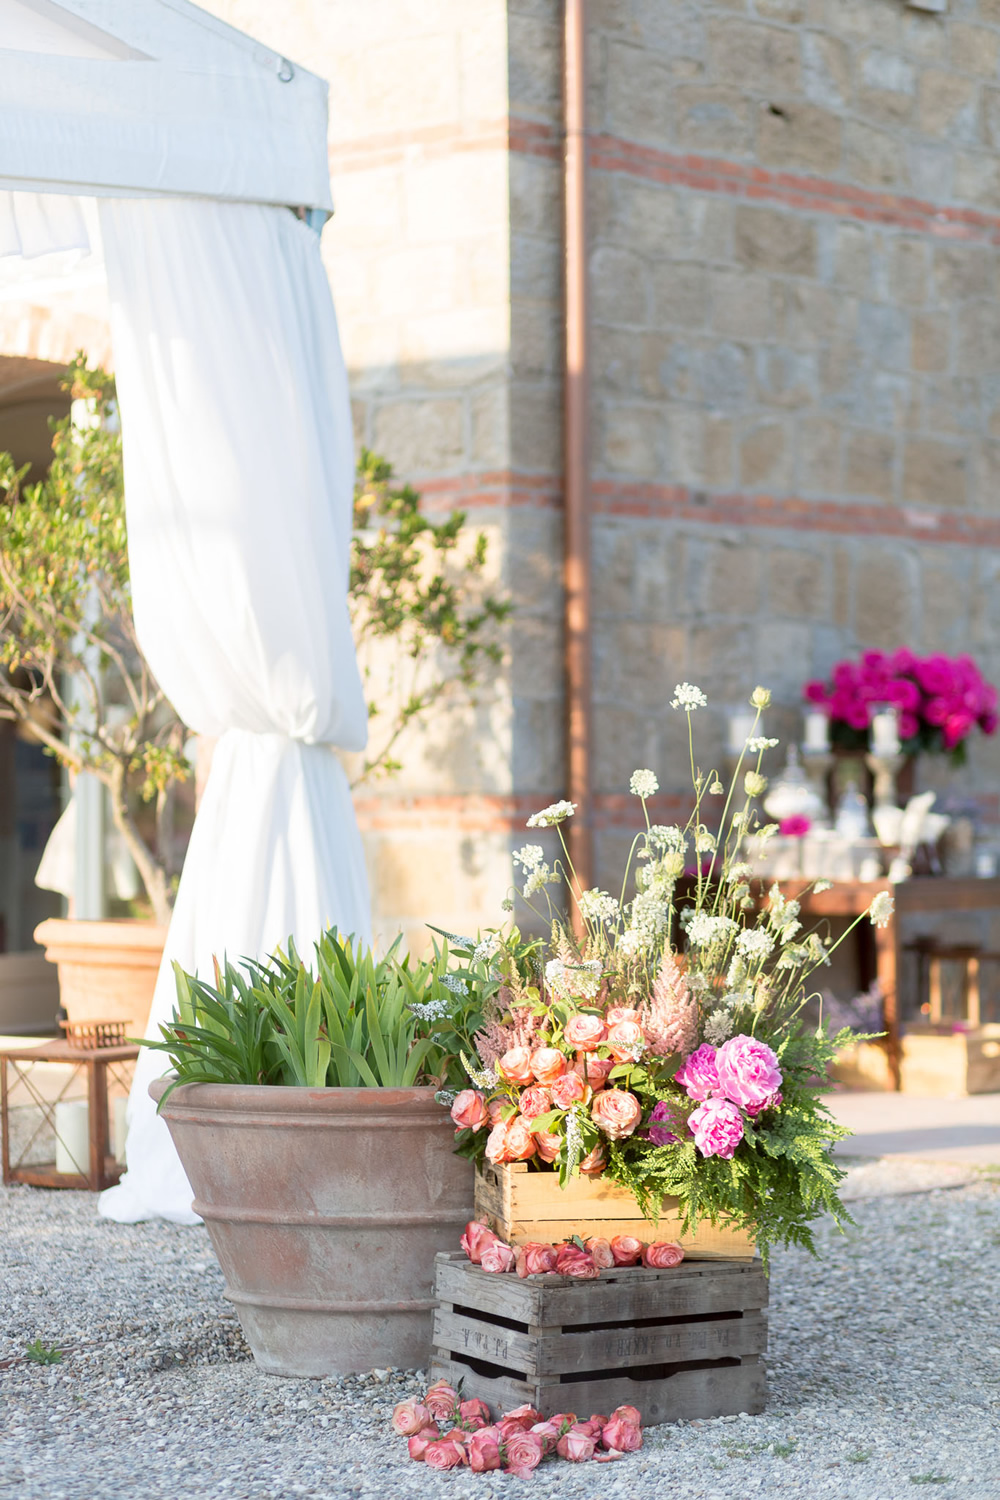 Getting married in Tuscany